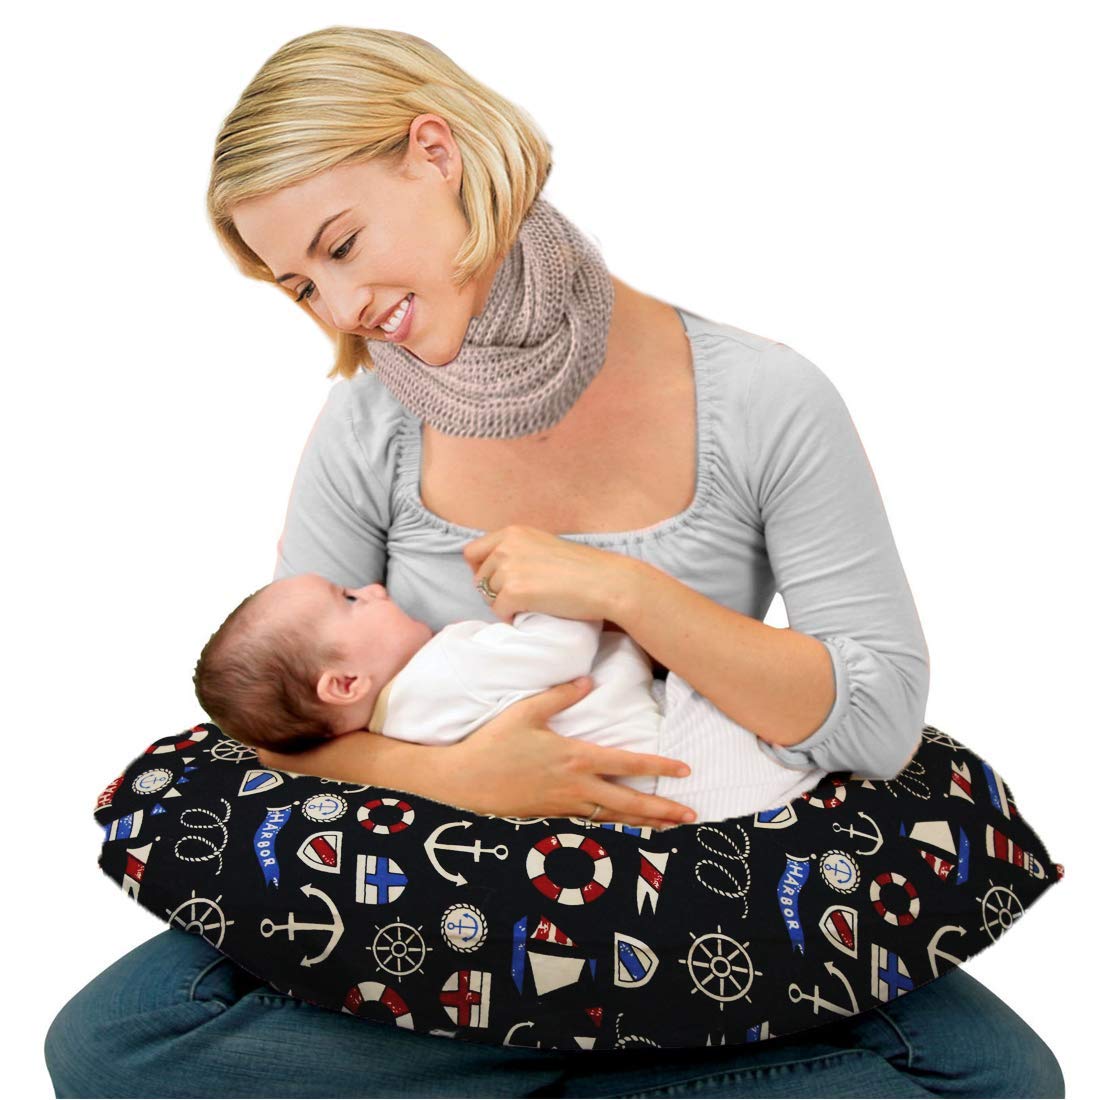 Kradyl Kroft Baby's 5-in-1 Feeding Pillow with Detachable Cover
